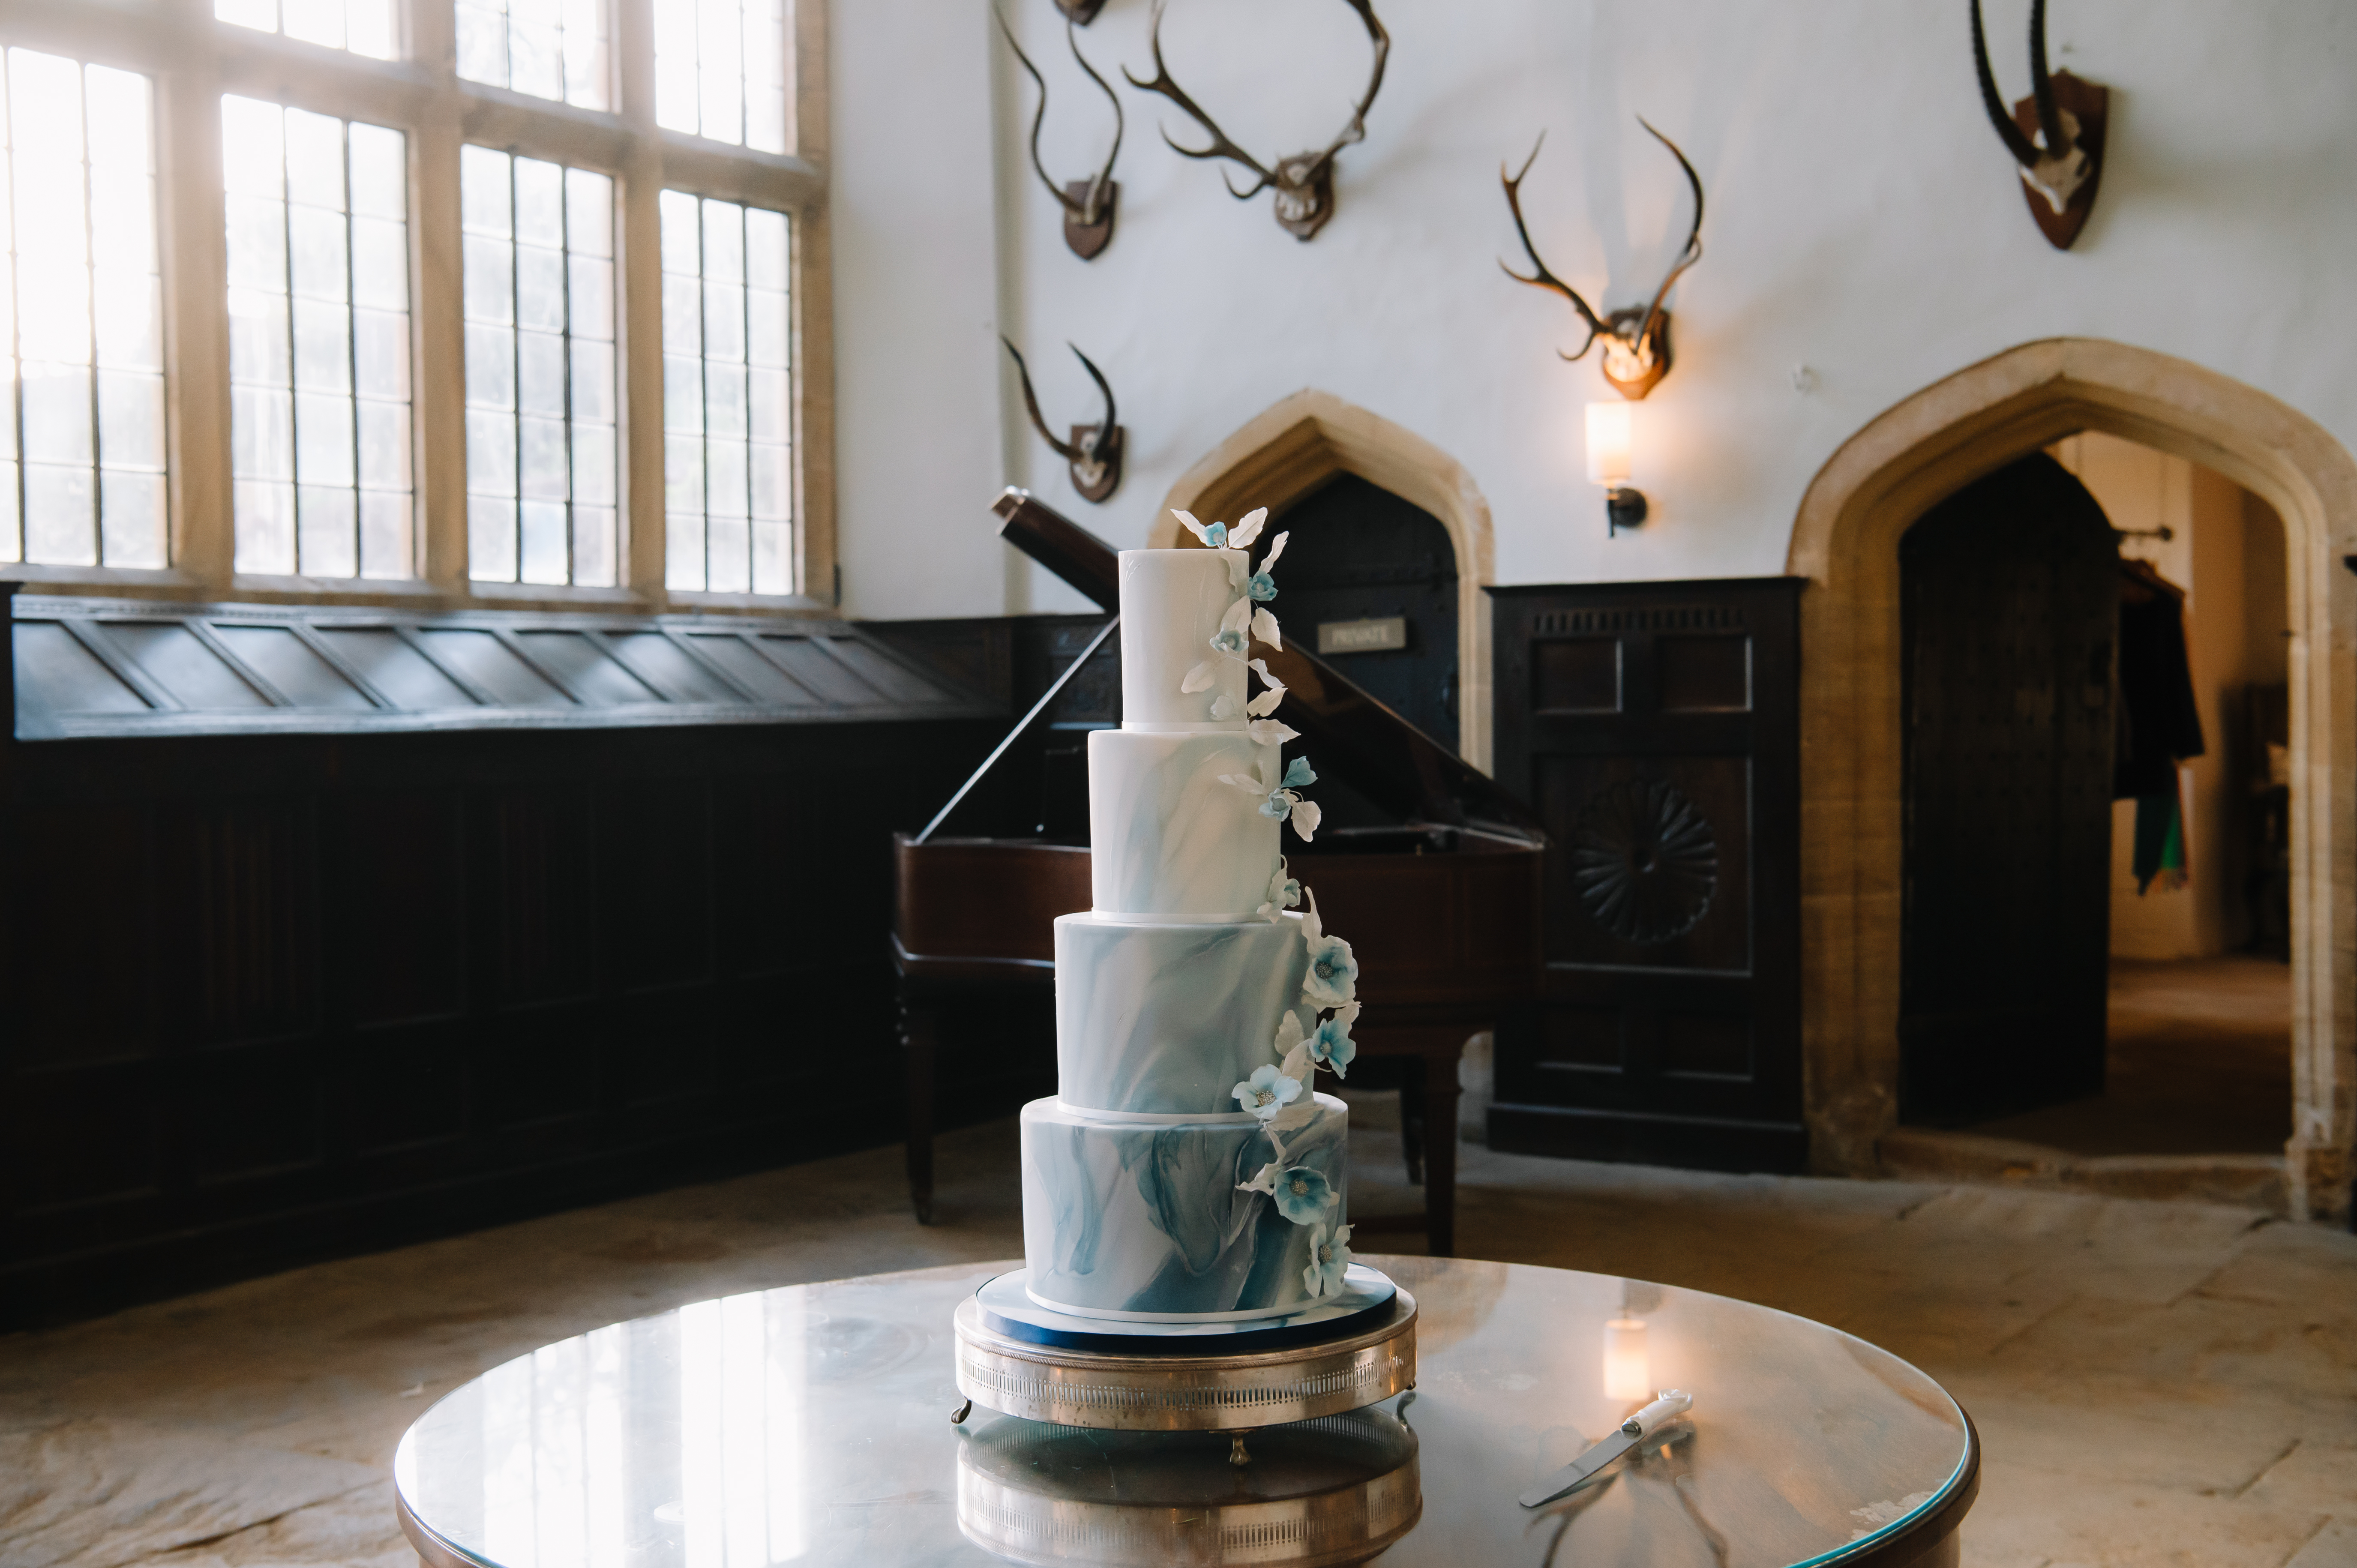 4 Tier Round Blue and White Ombre Marbled Wedding Cake with Cascading Blue and White Sugar Flowers and Foliage by Cocoa & Whey Cakes in Dorset